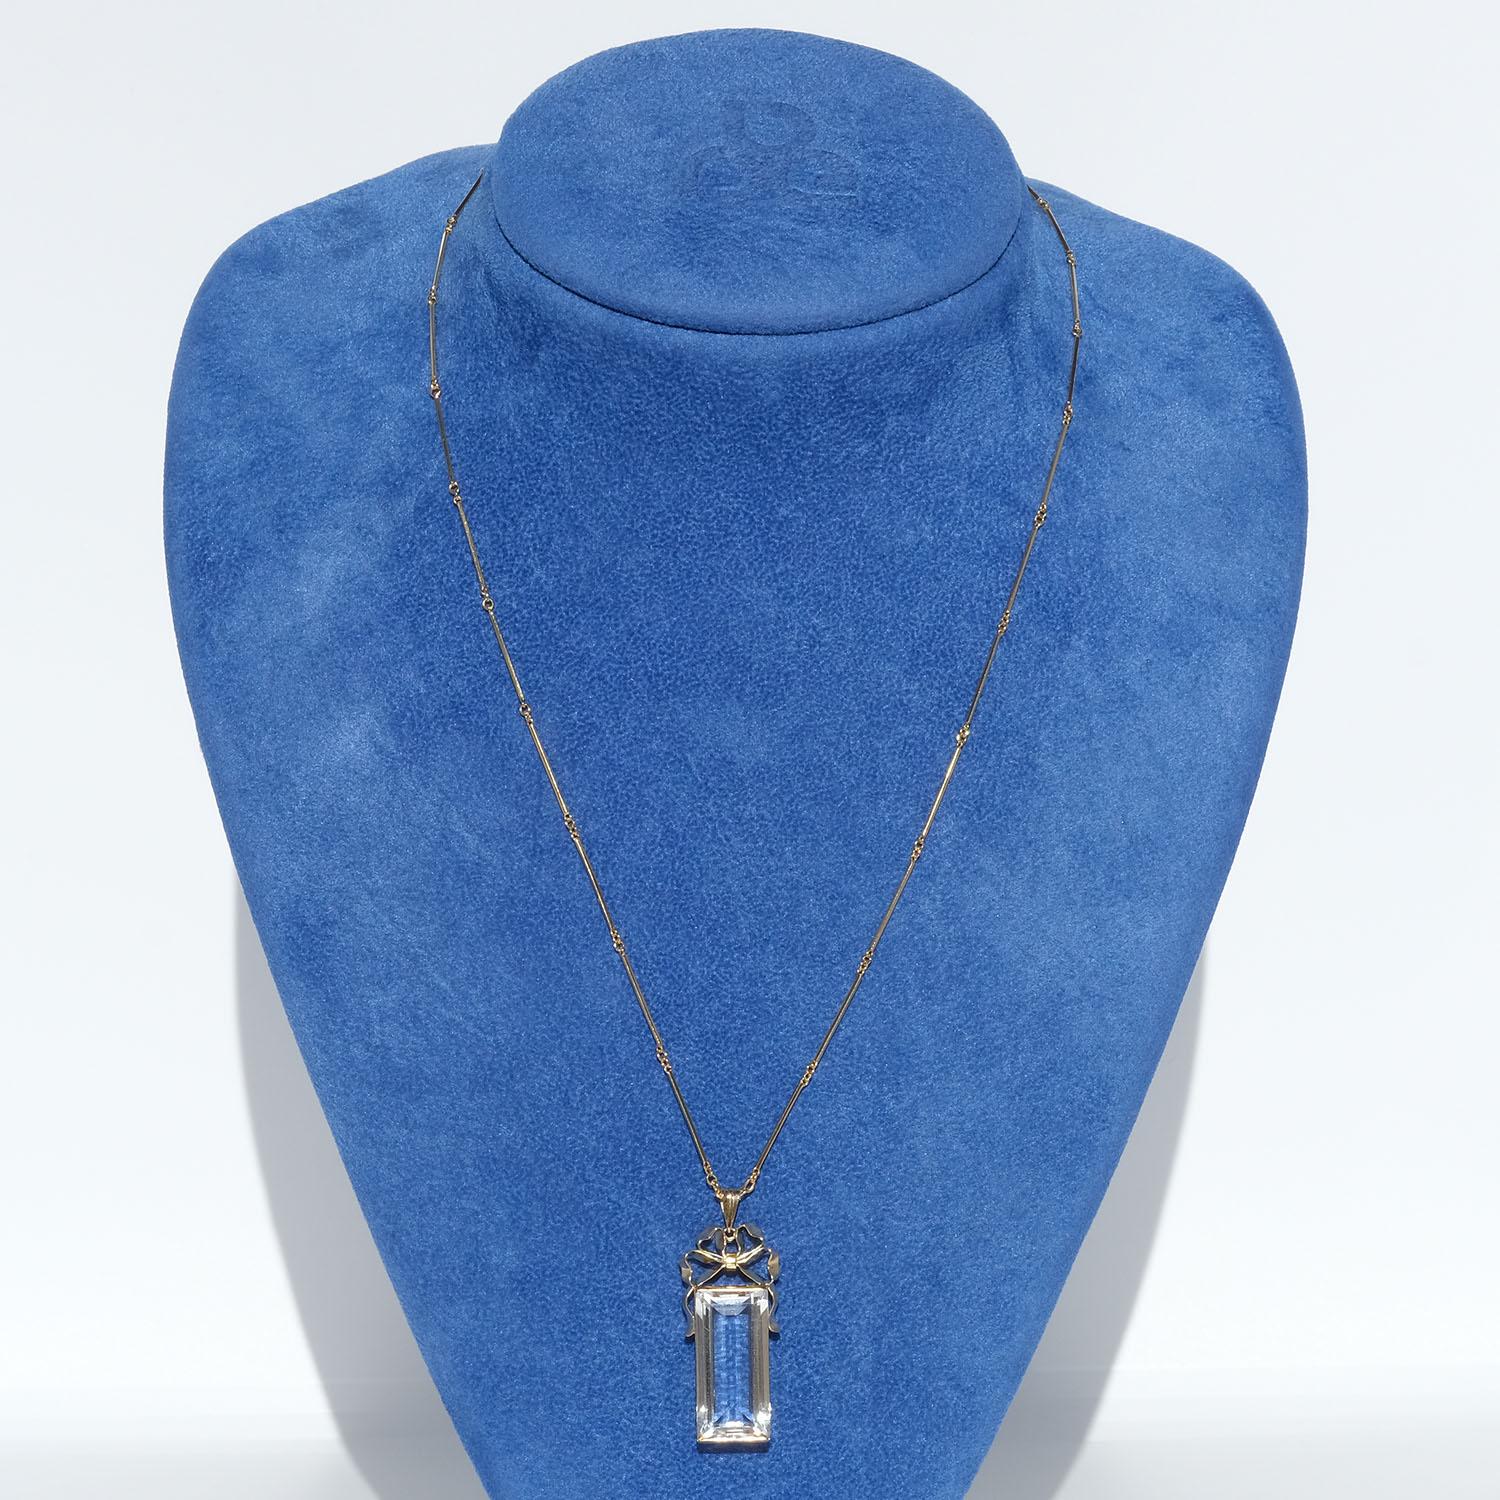 Vintage 18k Gold and Rock Crystal Necklace by Ateljé Stigbert Made in the 1940s For Sale 5